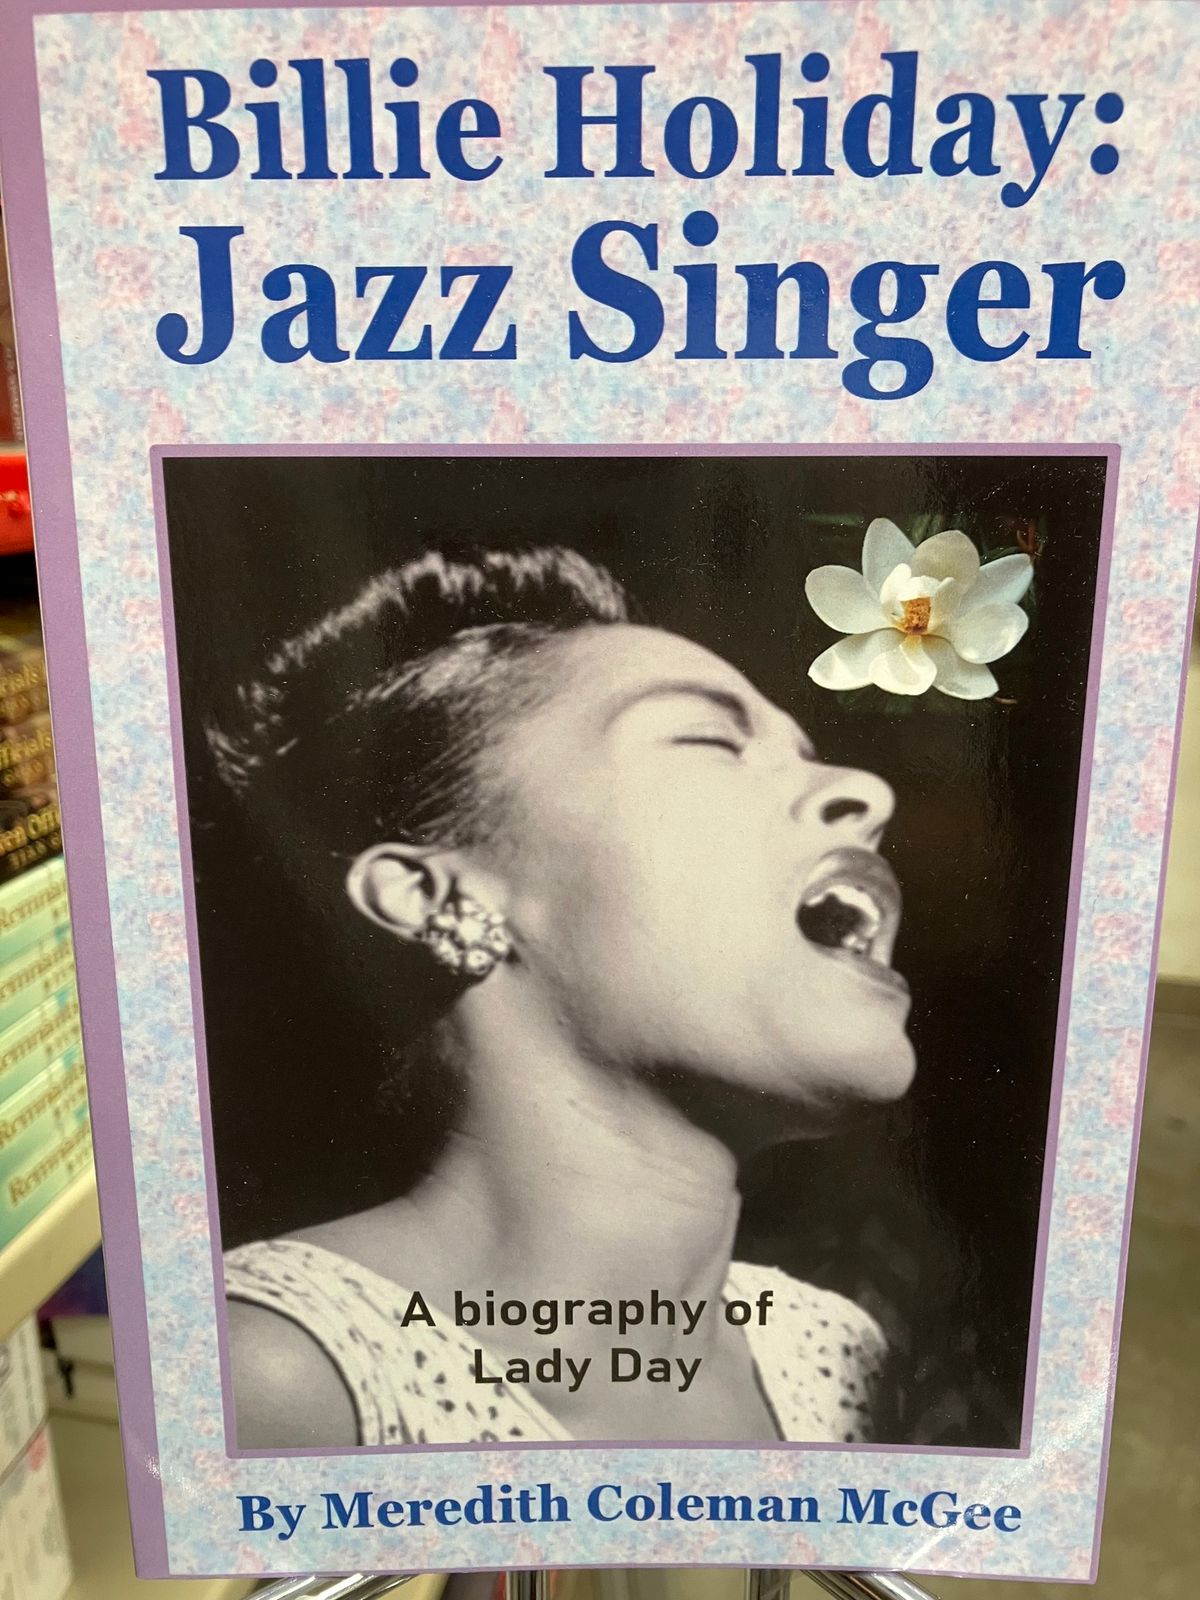 Billie Holiday: Jazz Singer by Meredith McGee Author Signing 